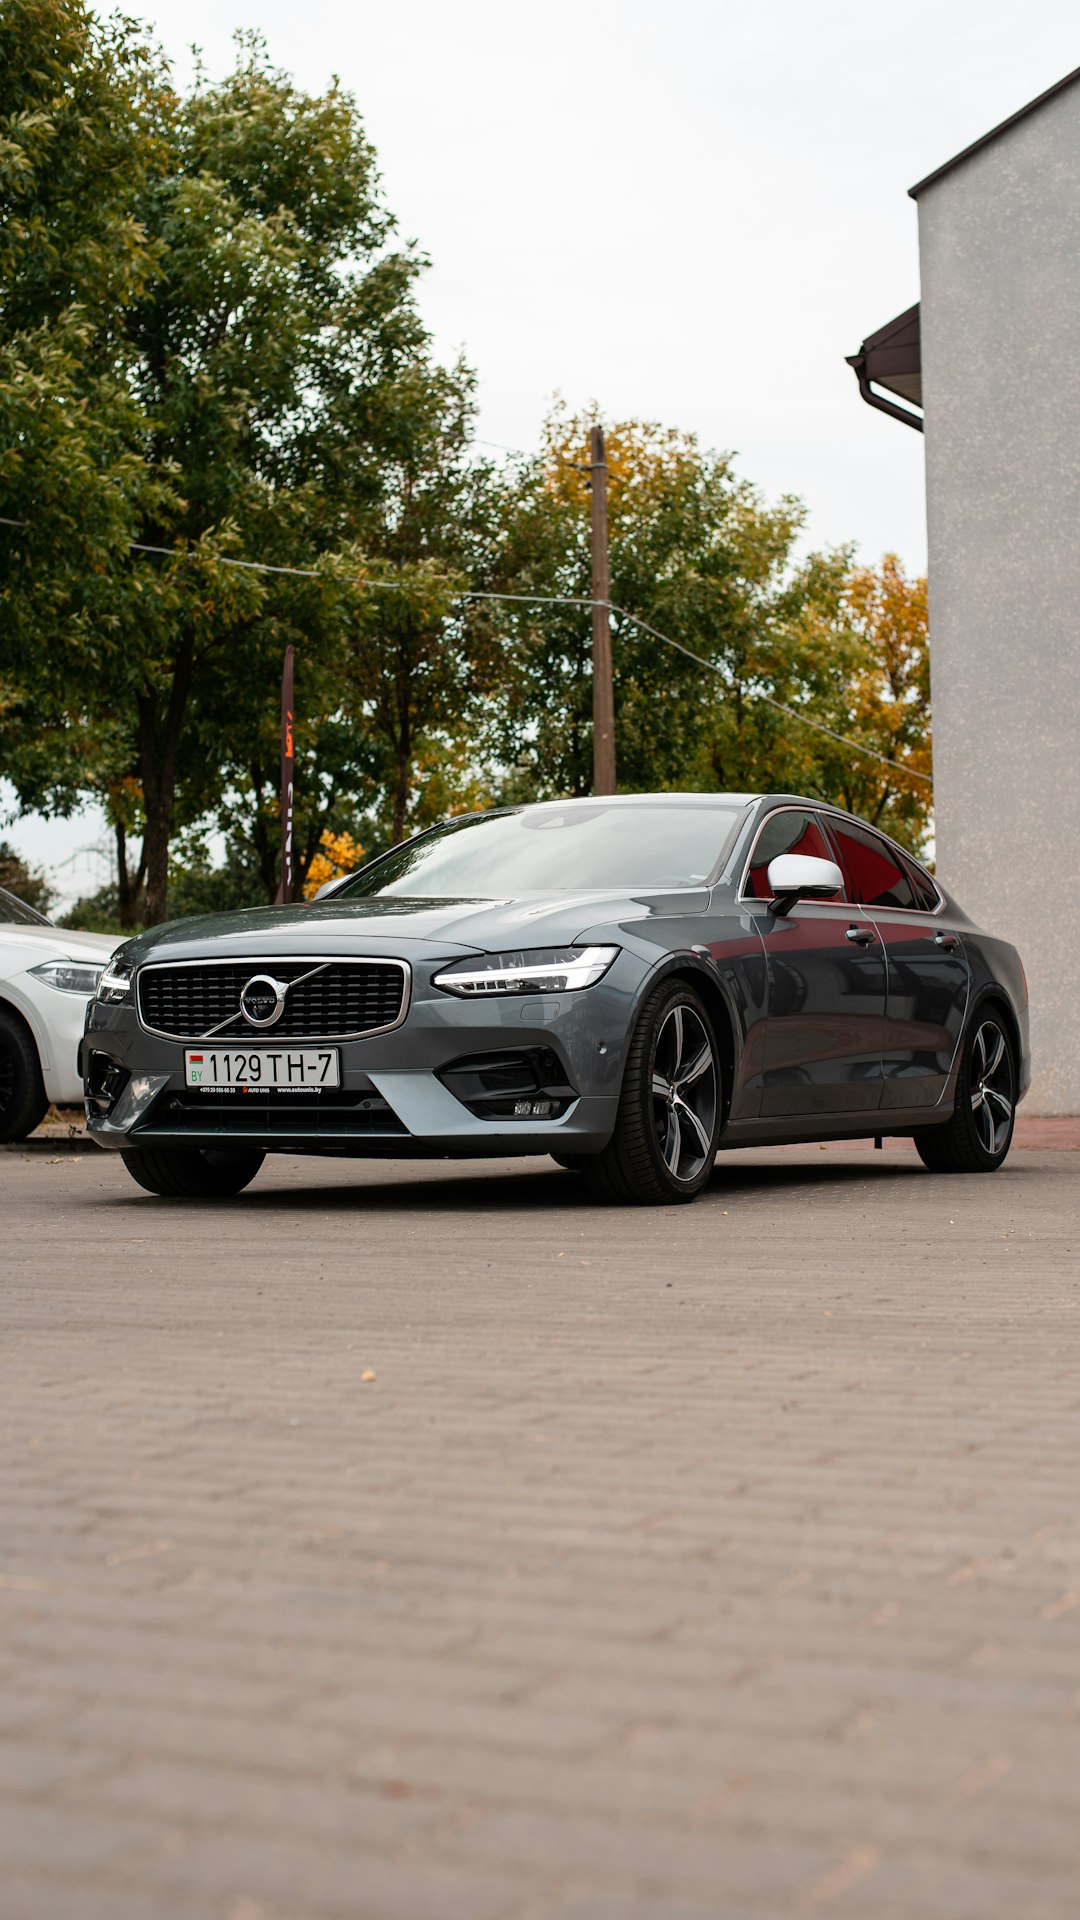 The Volvo V60 is a stylish and versatile luxury wagon with a strong emphasis on safety features.